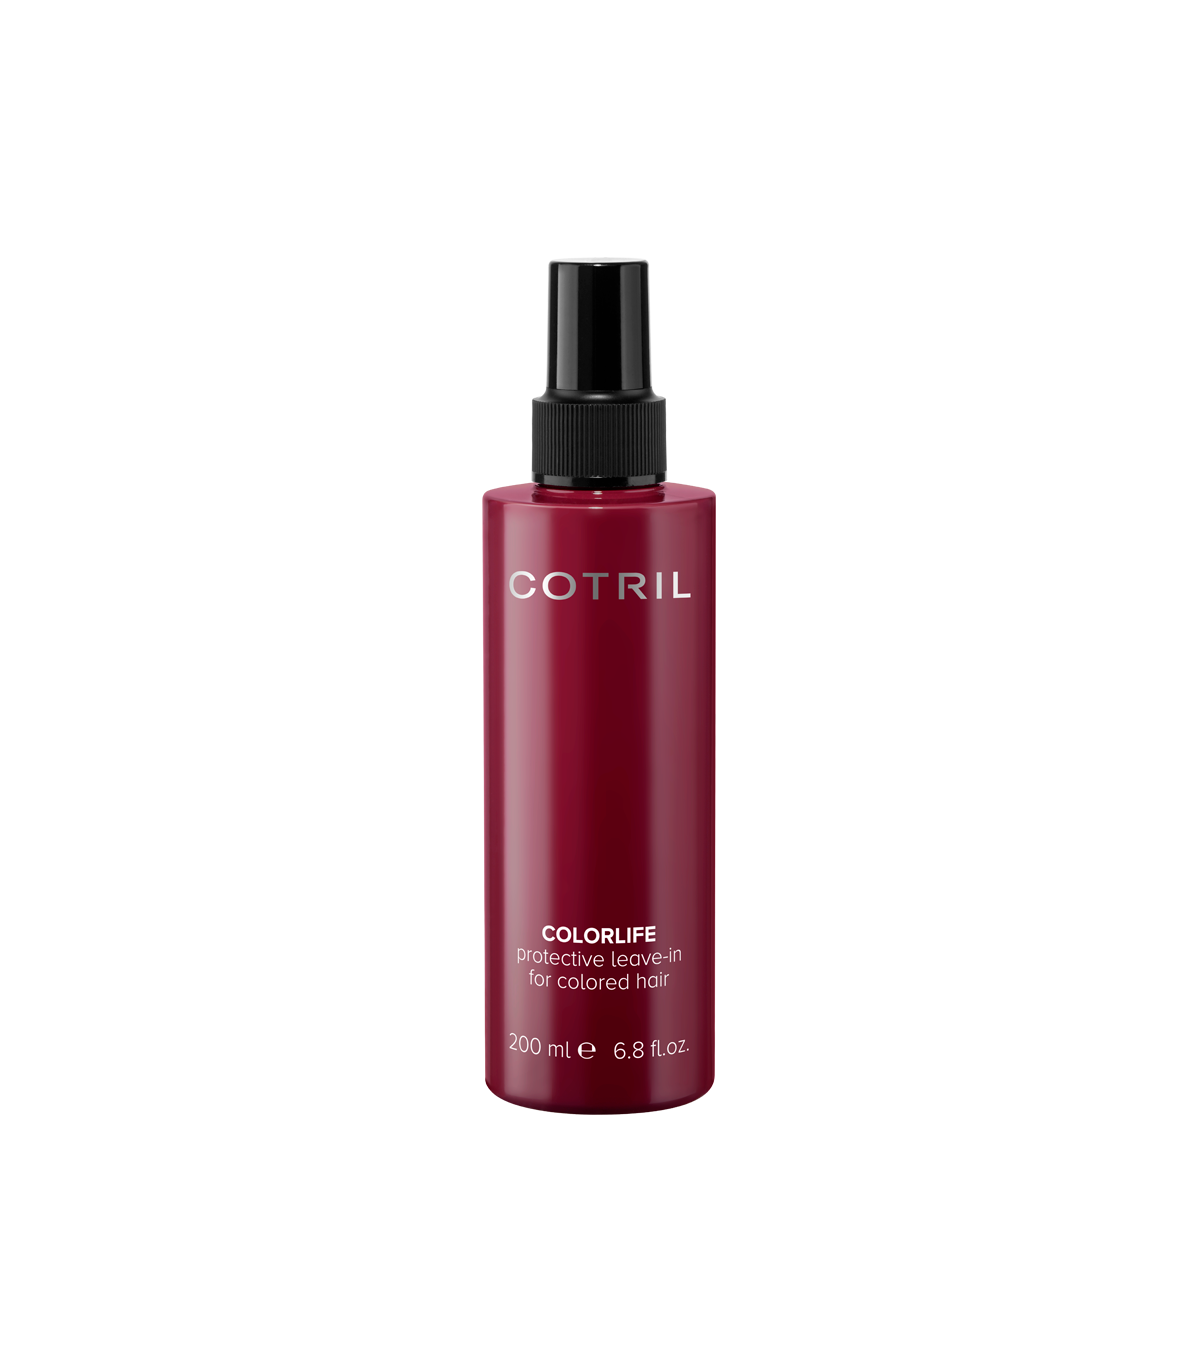 Colorlife Protective Leave-in 200ml